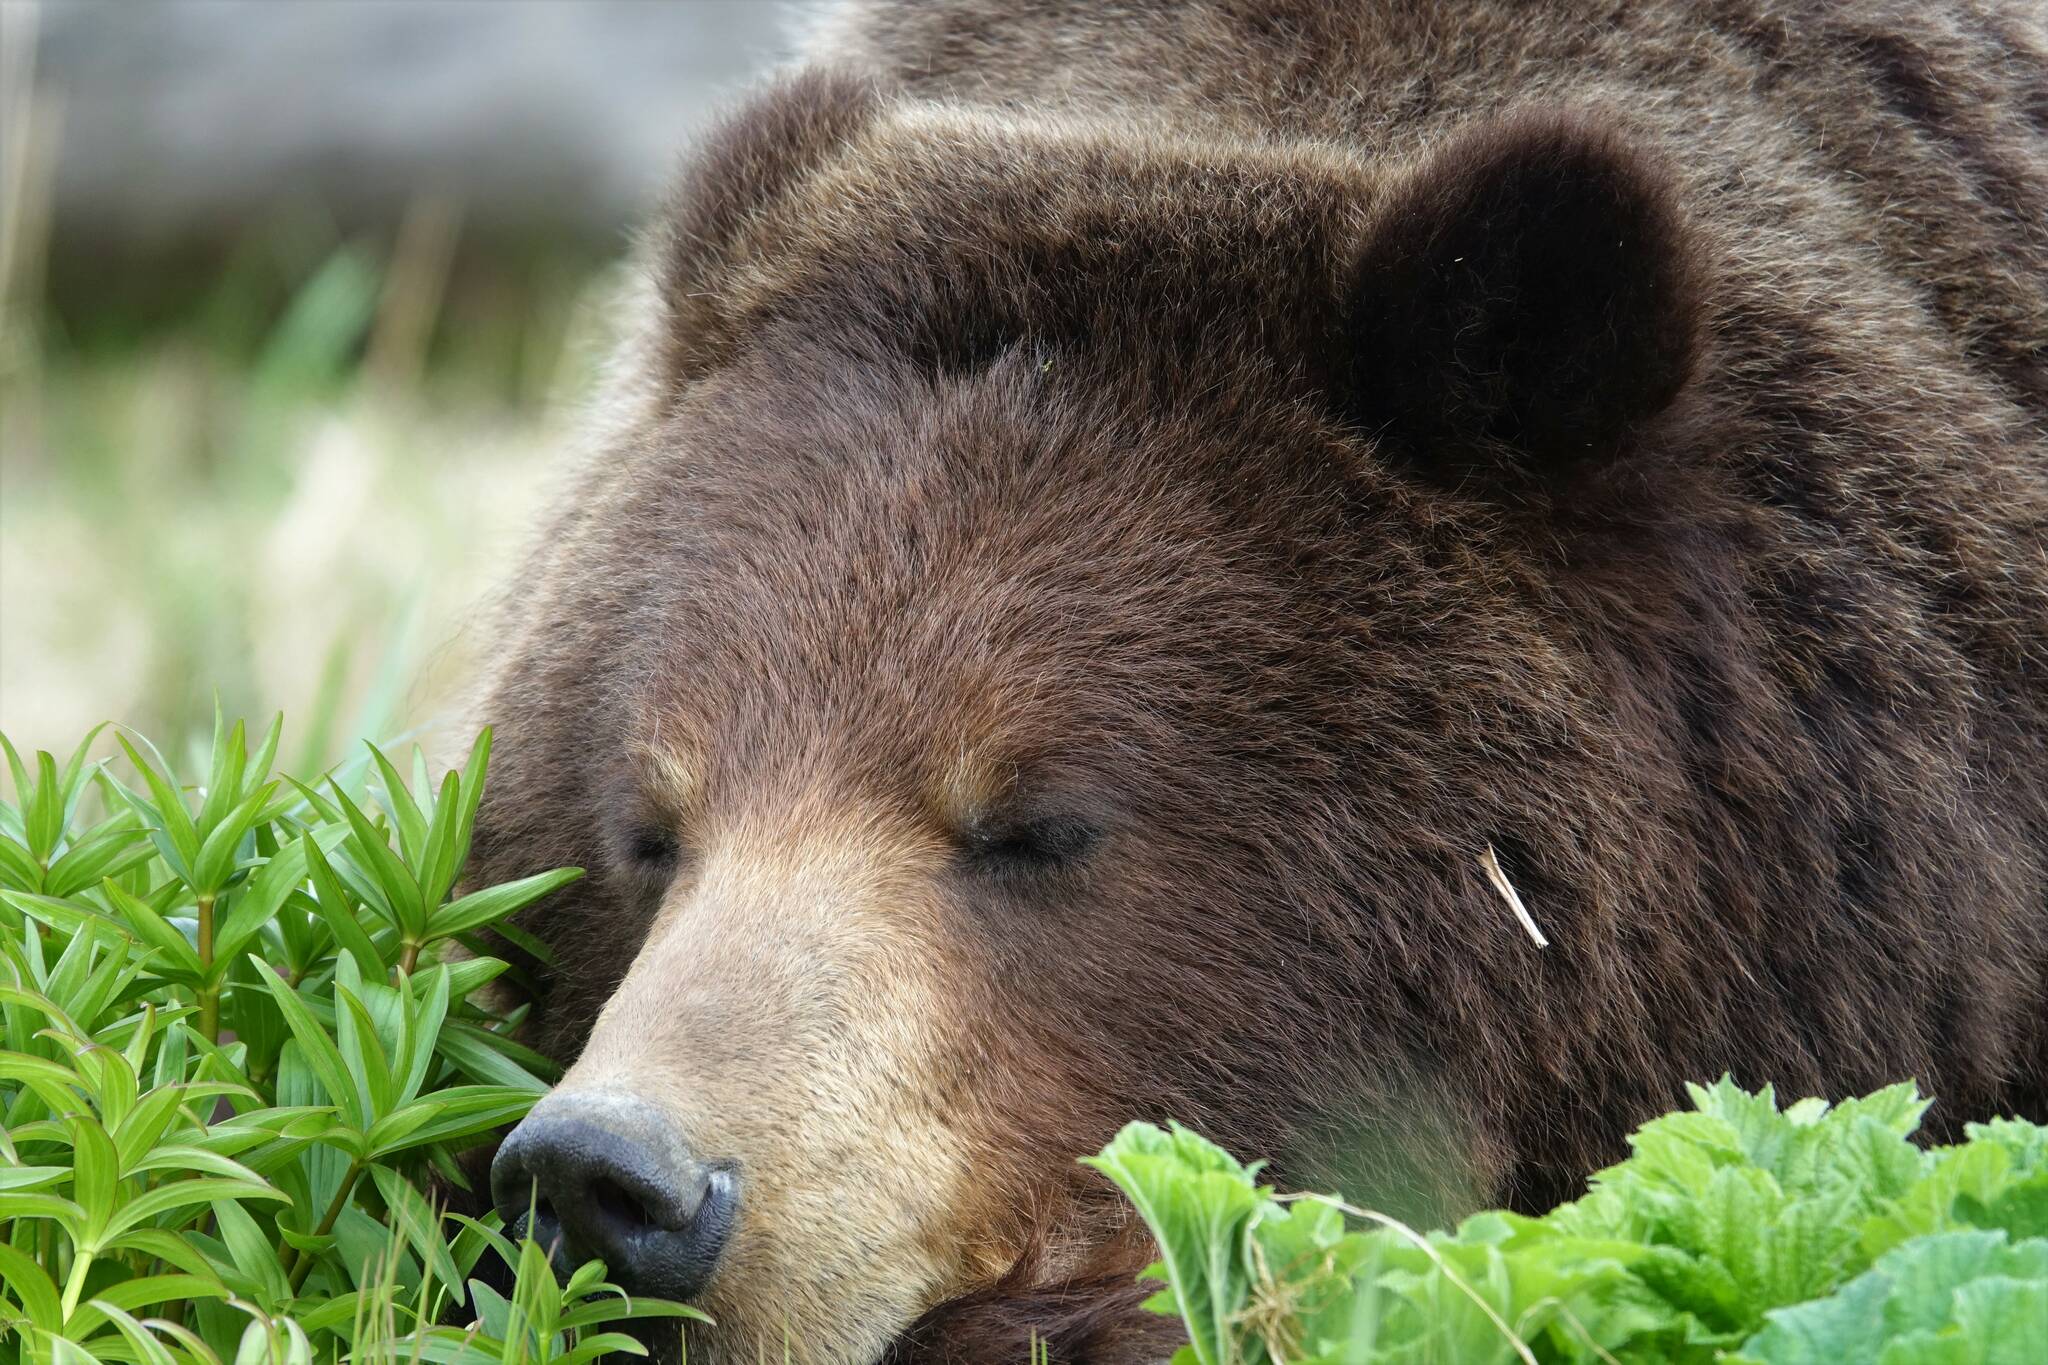 A brown bear sleeps after taking a break from grazing on spring vegetation. (Courtesy Photo / Bjorn Dihle)